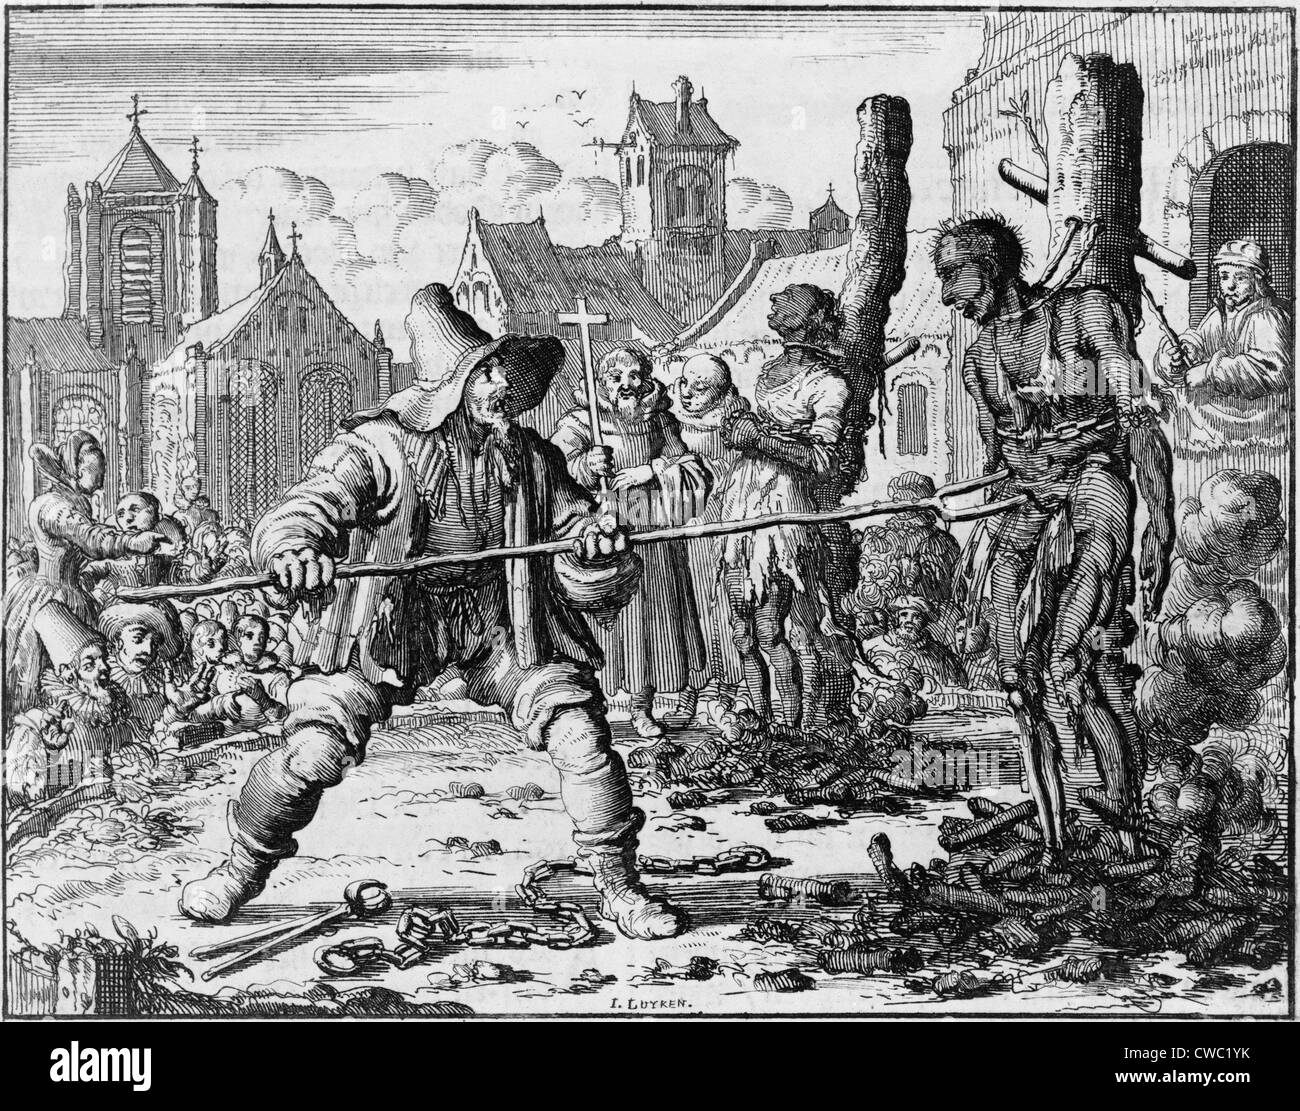 Execution of David van der Leyen and Levina Ghyselins Dutch Anabaptists or Mennonites by Catholic authorities in Ghent in 1554. Stock Photo